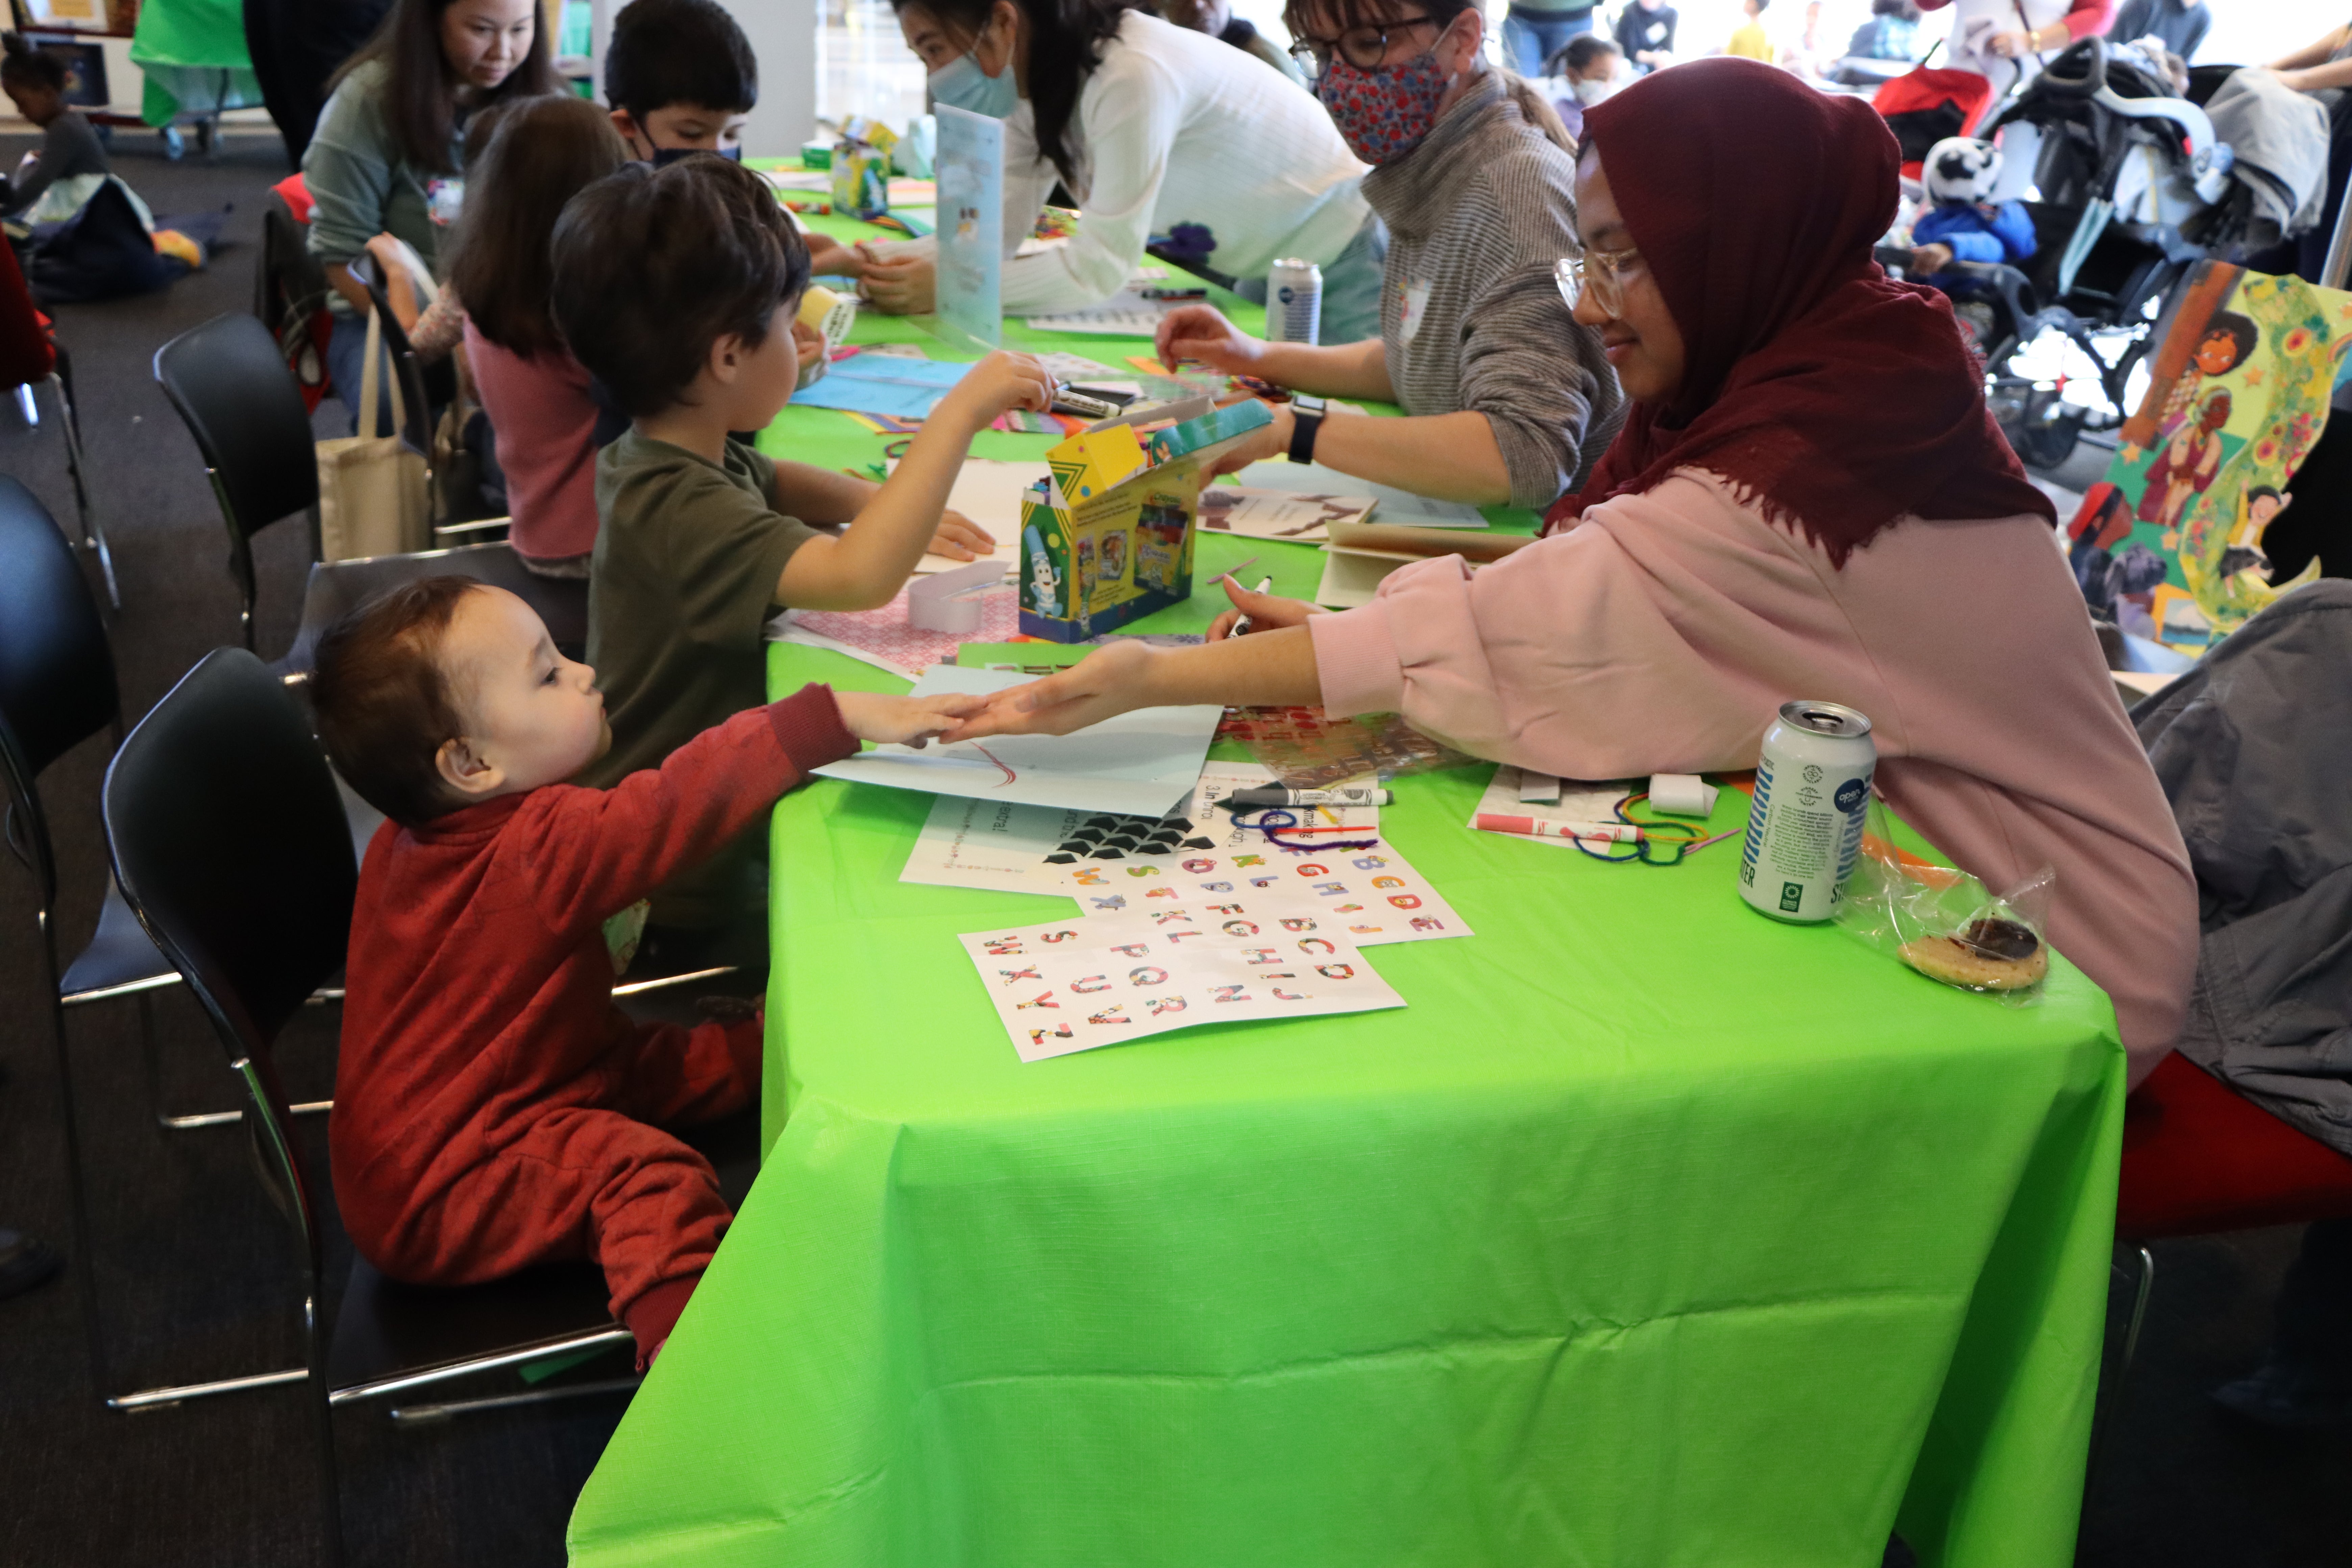 Children/students participate in activities hosted by staff and volunteers at a community literacy event